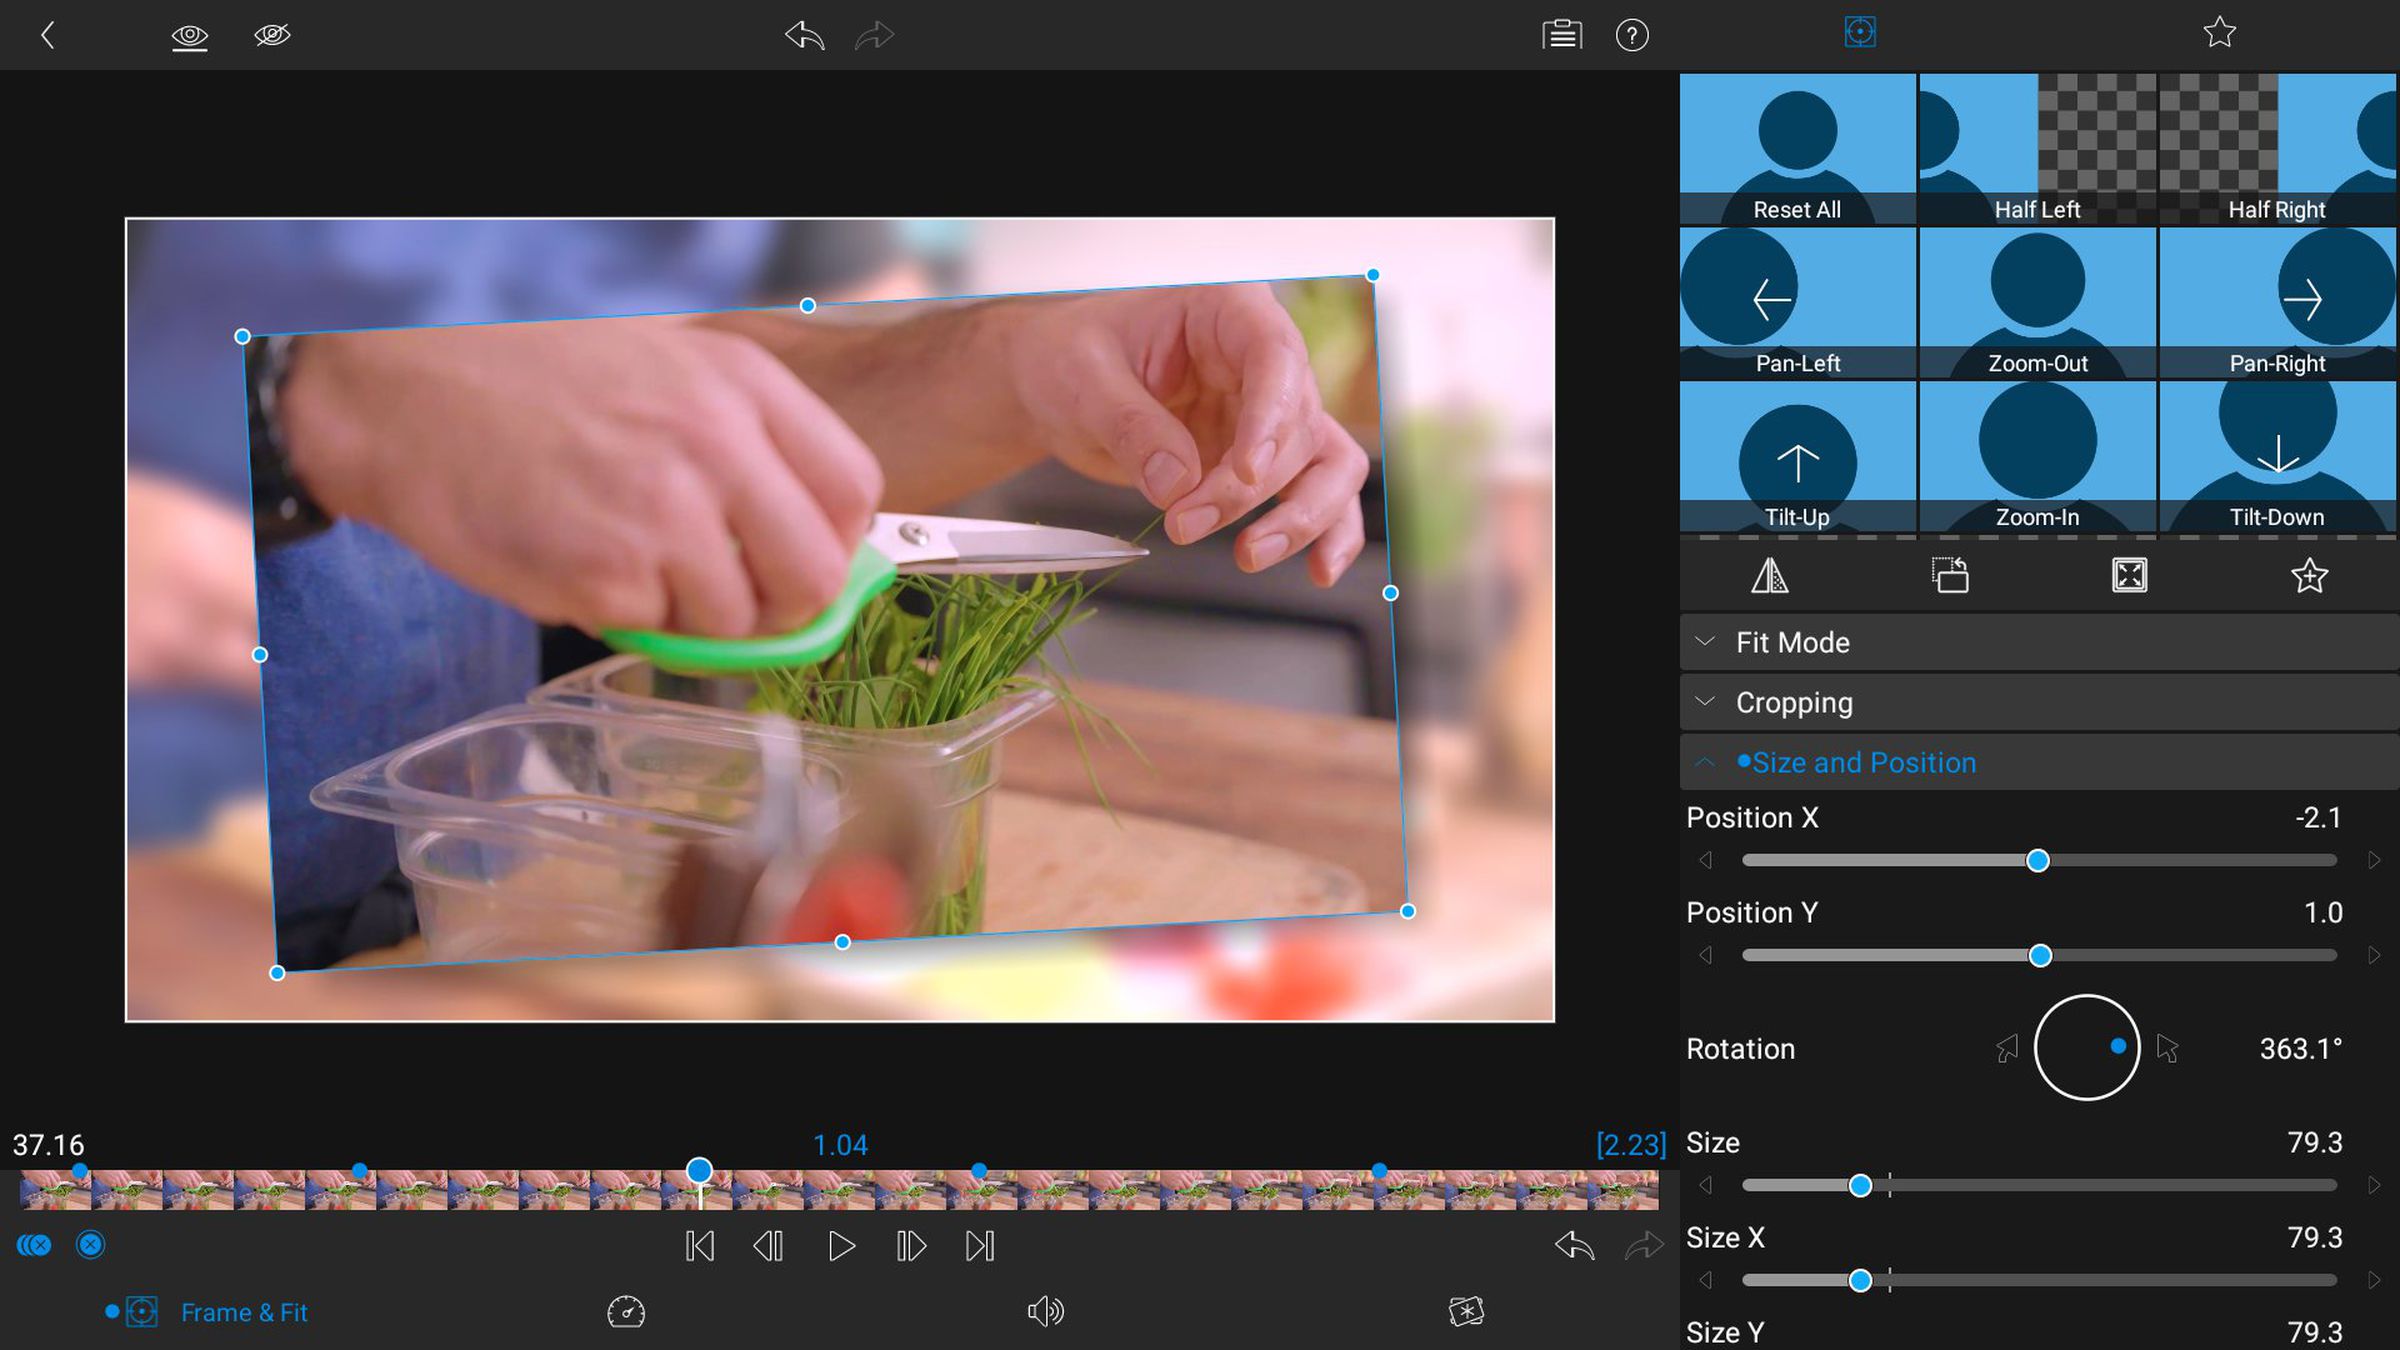 A screengrab of someone using the LumaFusion video editing app on a desktop computer.